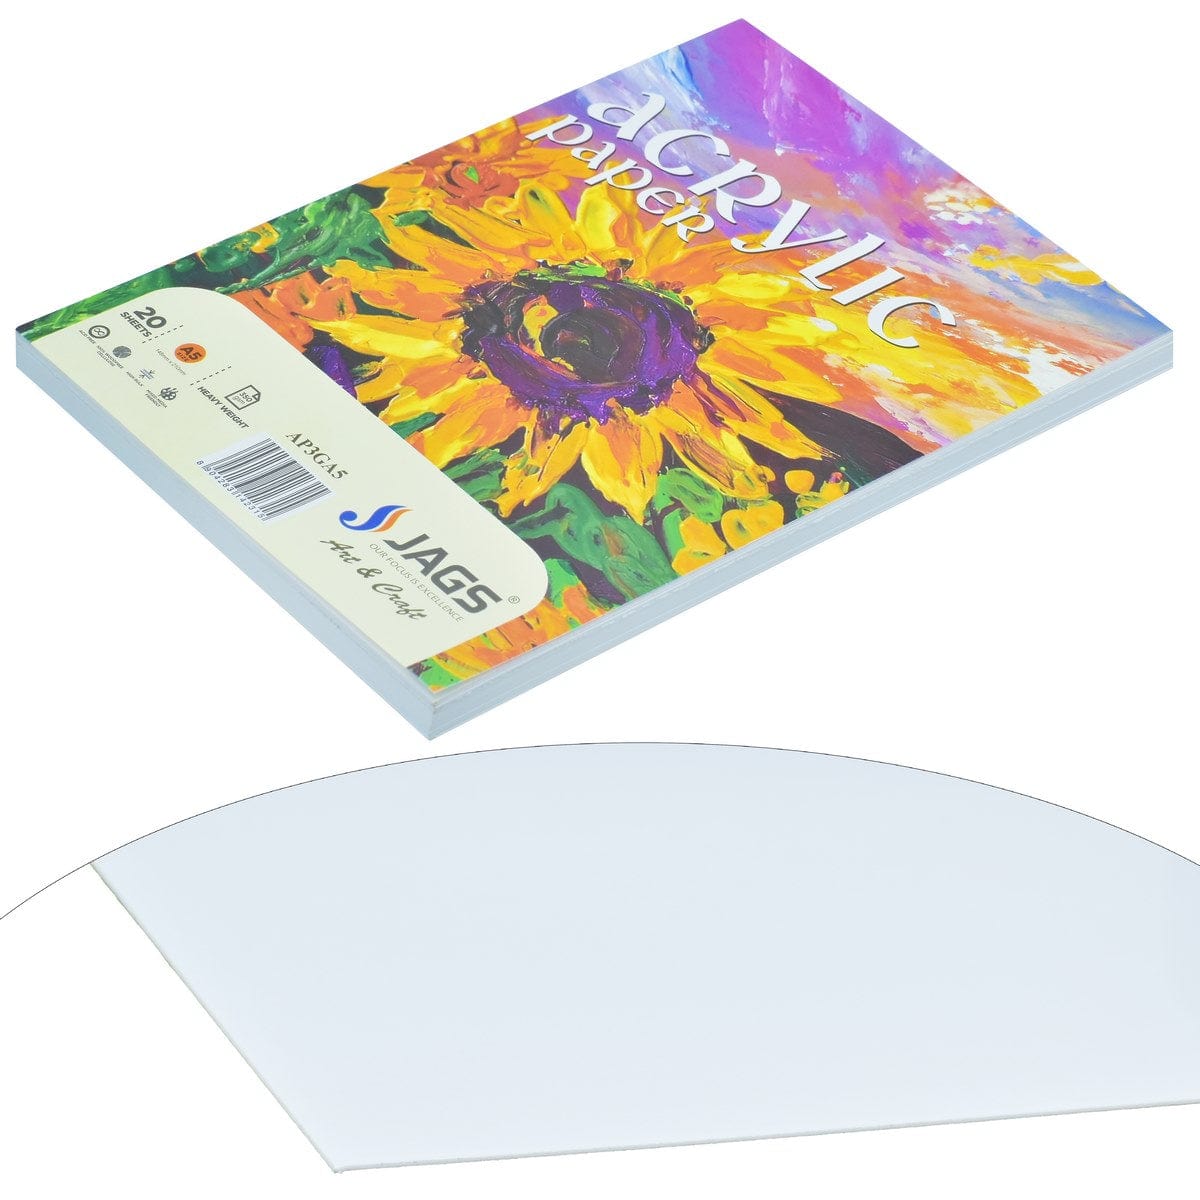 jags-mumbai Paper High-Quality 350gsm Acrylic Paper for Mixed Media - A5 Size 20 Sheets